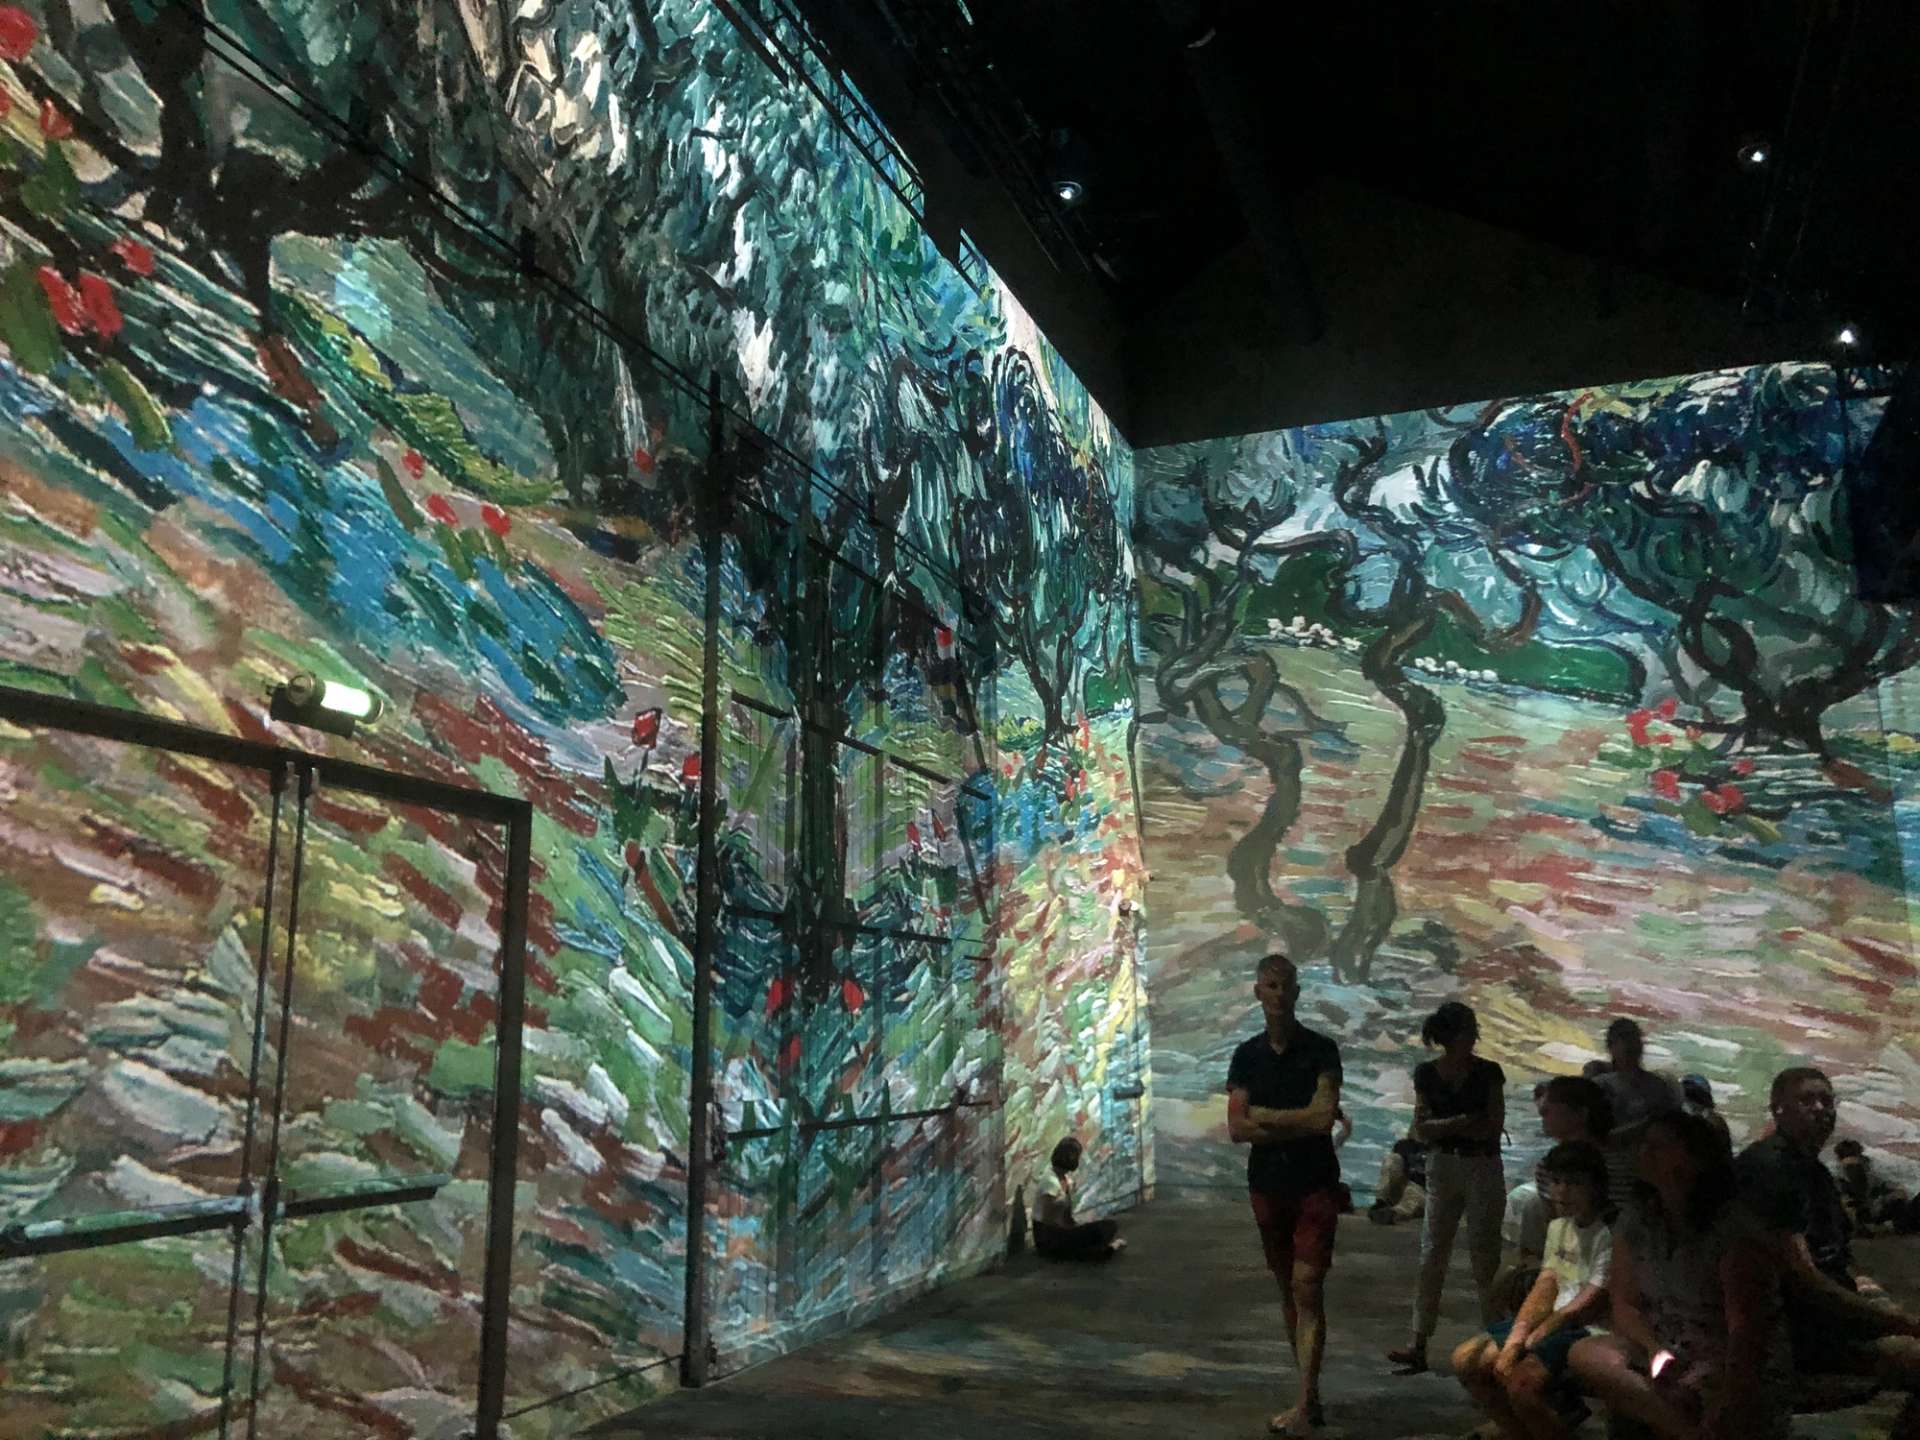 This photograph shows Vincent Van Gogh's art projected in large-scale in a room, as people walk around it.